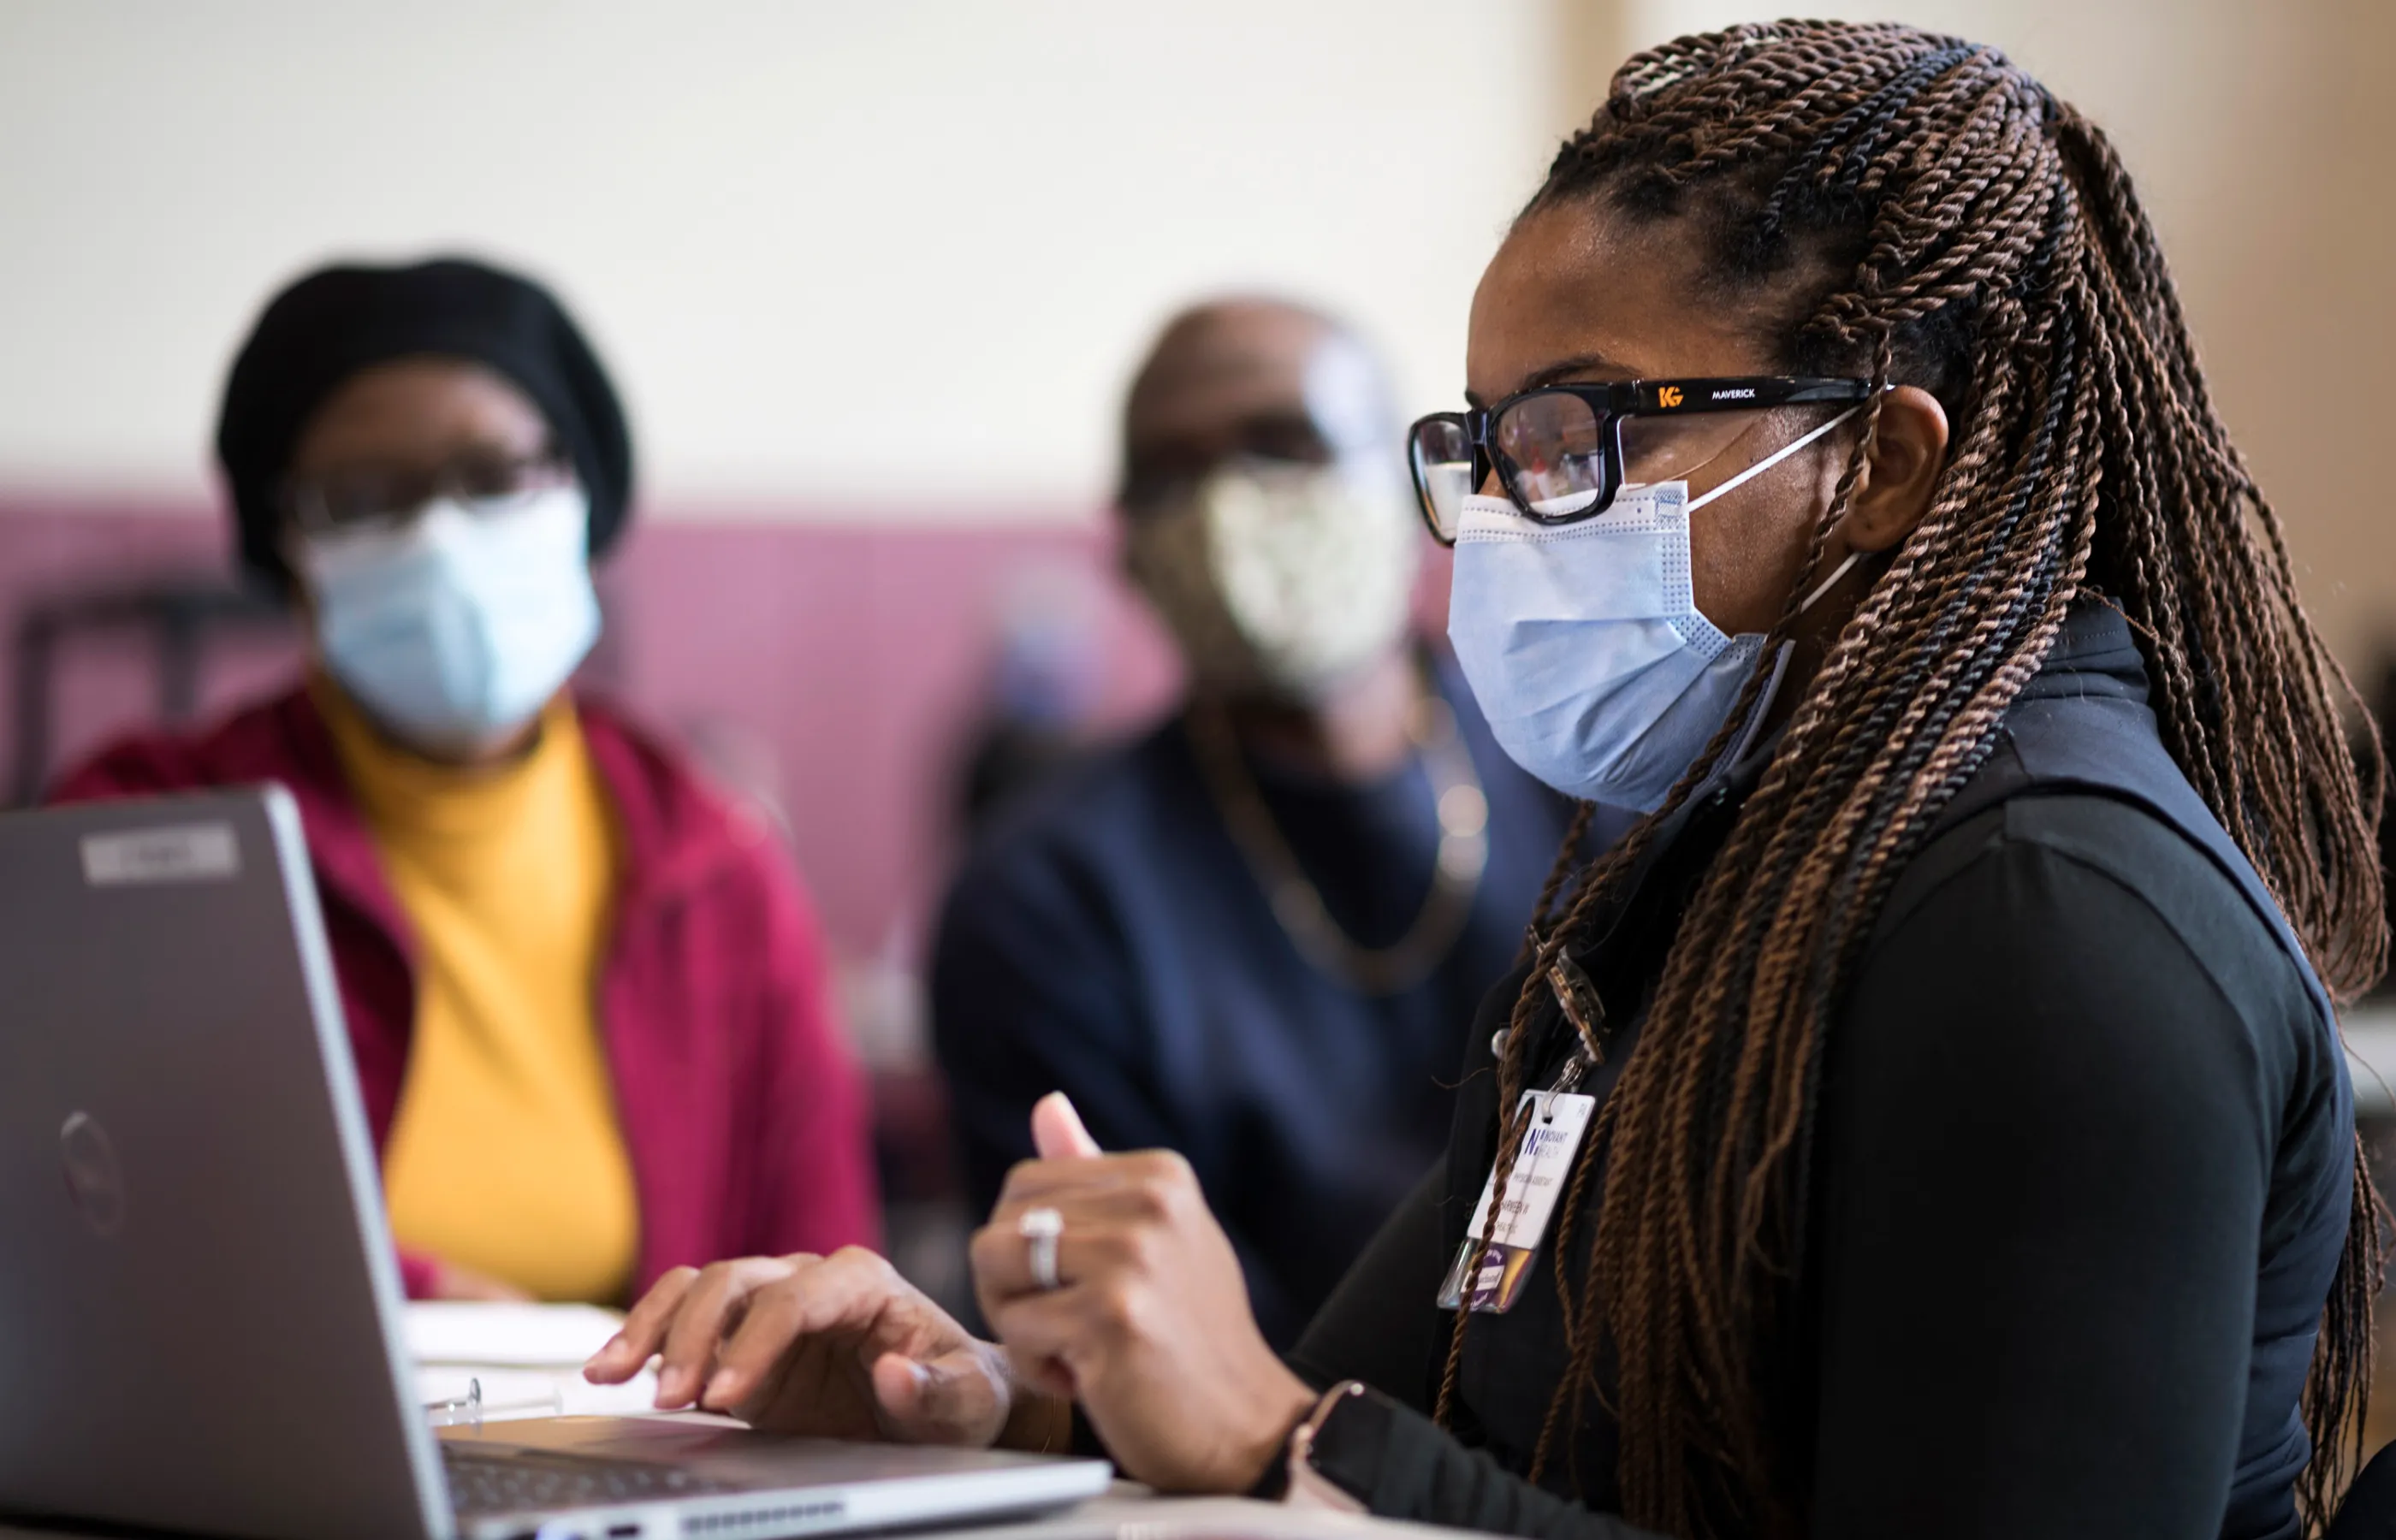 Novant Health team member and couple at a community care event. Everyone is masked and the team member is gathering information on a laptop. 